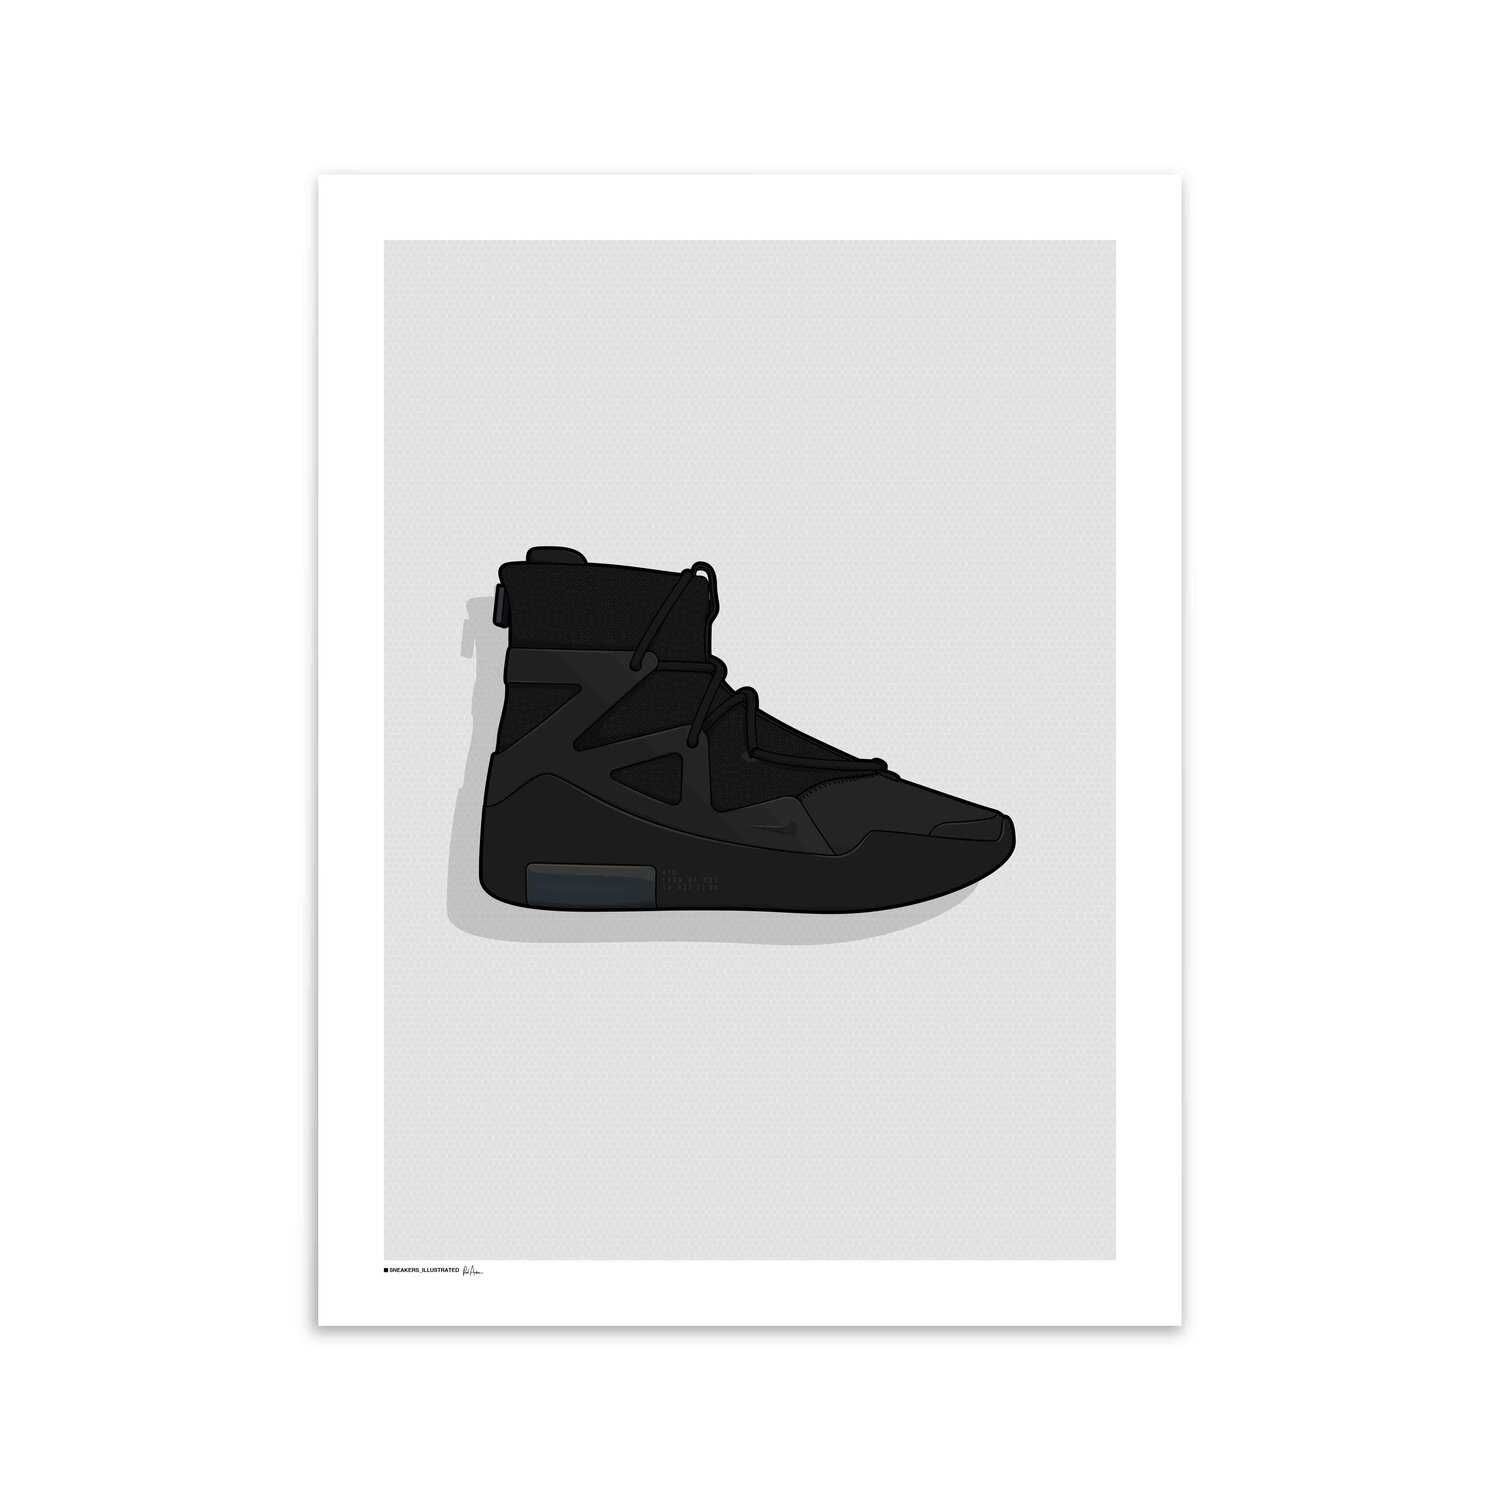 lexicon Vernederen Knorrig Nike Air Fear of God 1 'Triple Black' Poster — Sneakers Illustrated